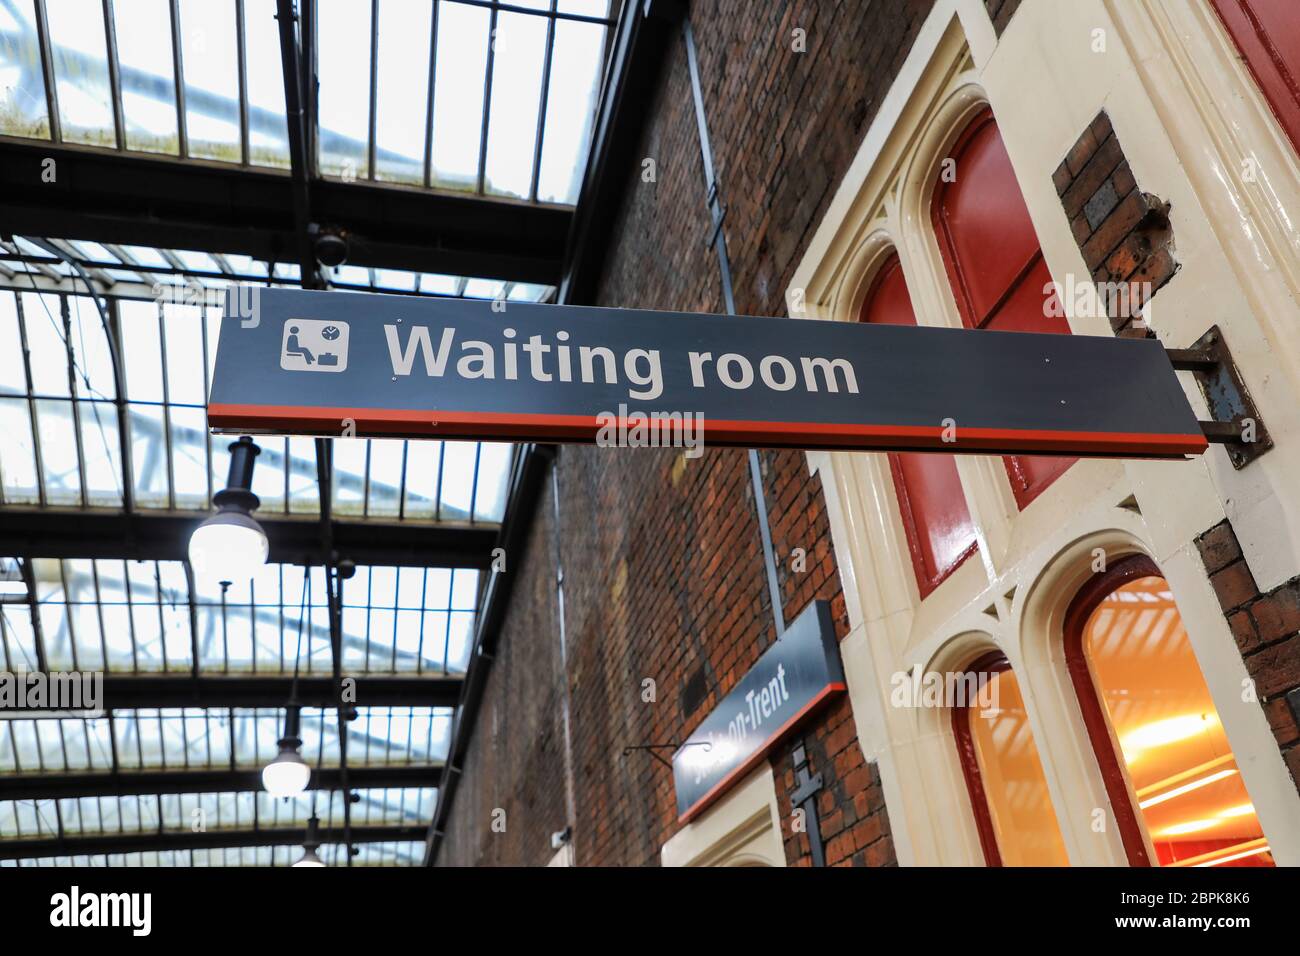 A Waiting Room sign at Stoke-on-Trent railway station, Stoke on Trent, Staffordshire, England, UK Stock Photo